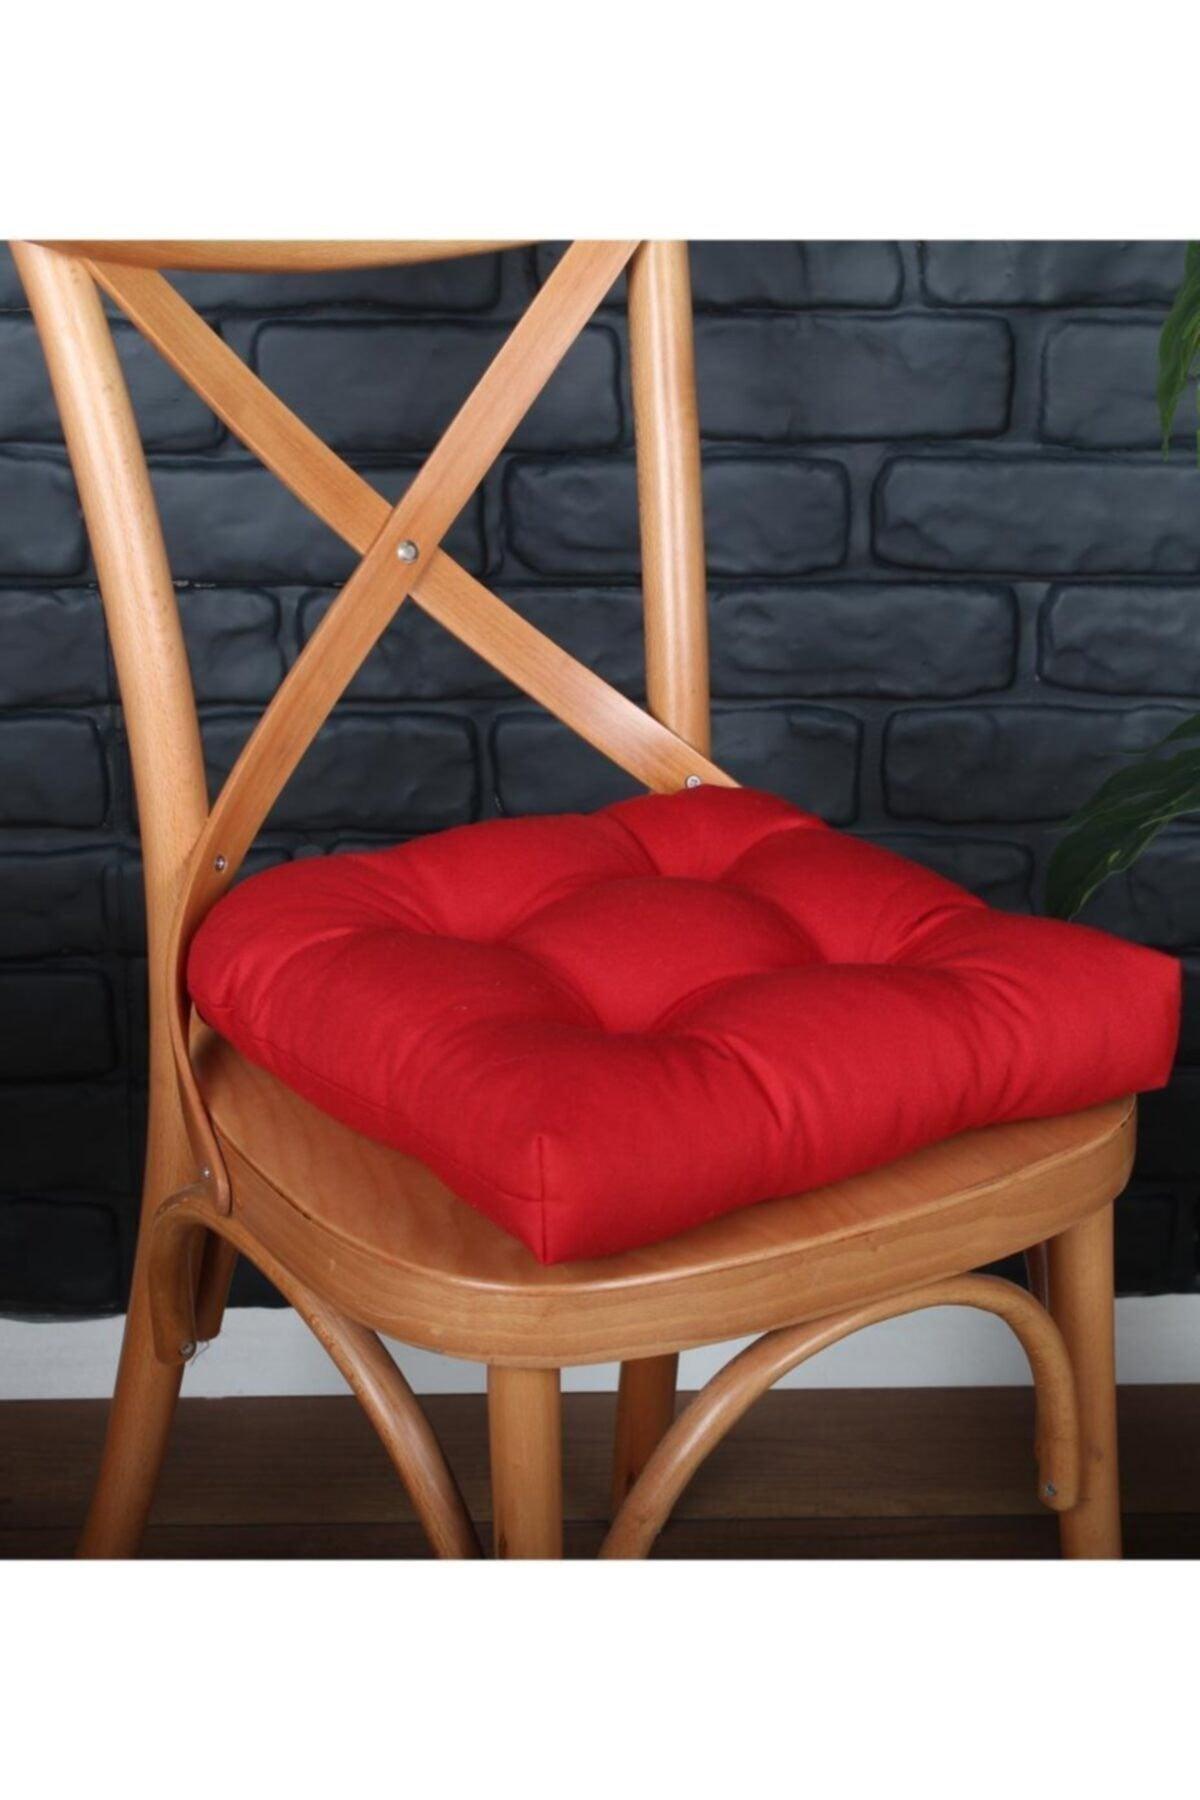 Lux Pofidik Red Chair Cushion Special Stitched Laced 40x40cm - Swordslife